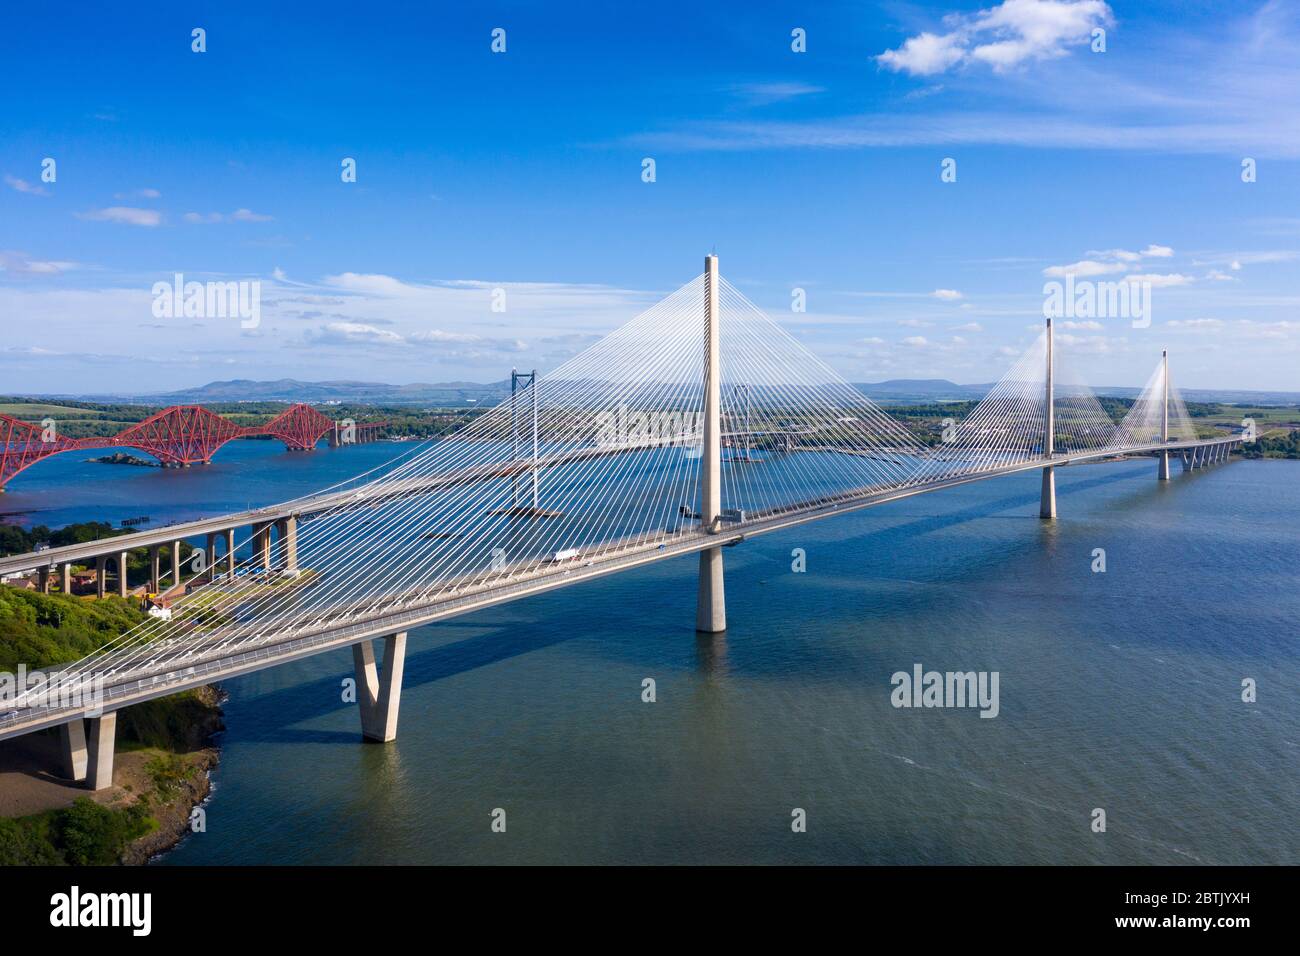 Aerial view of three bridges crossing the River Forth with new Queensferry Crossing in front at North Queensferry, Fife, Scotland, UK Stock Photo